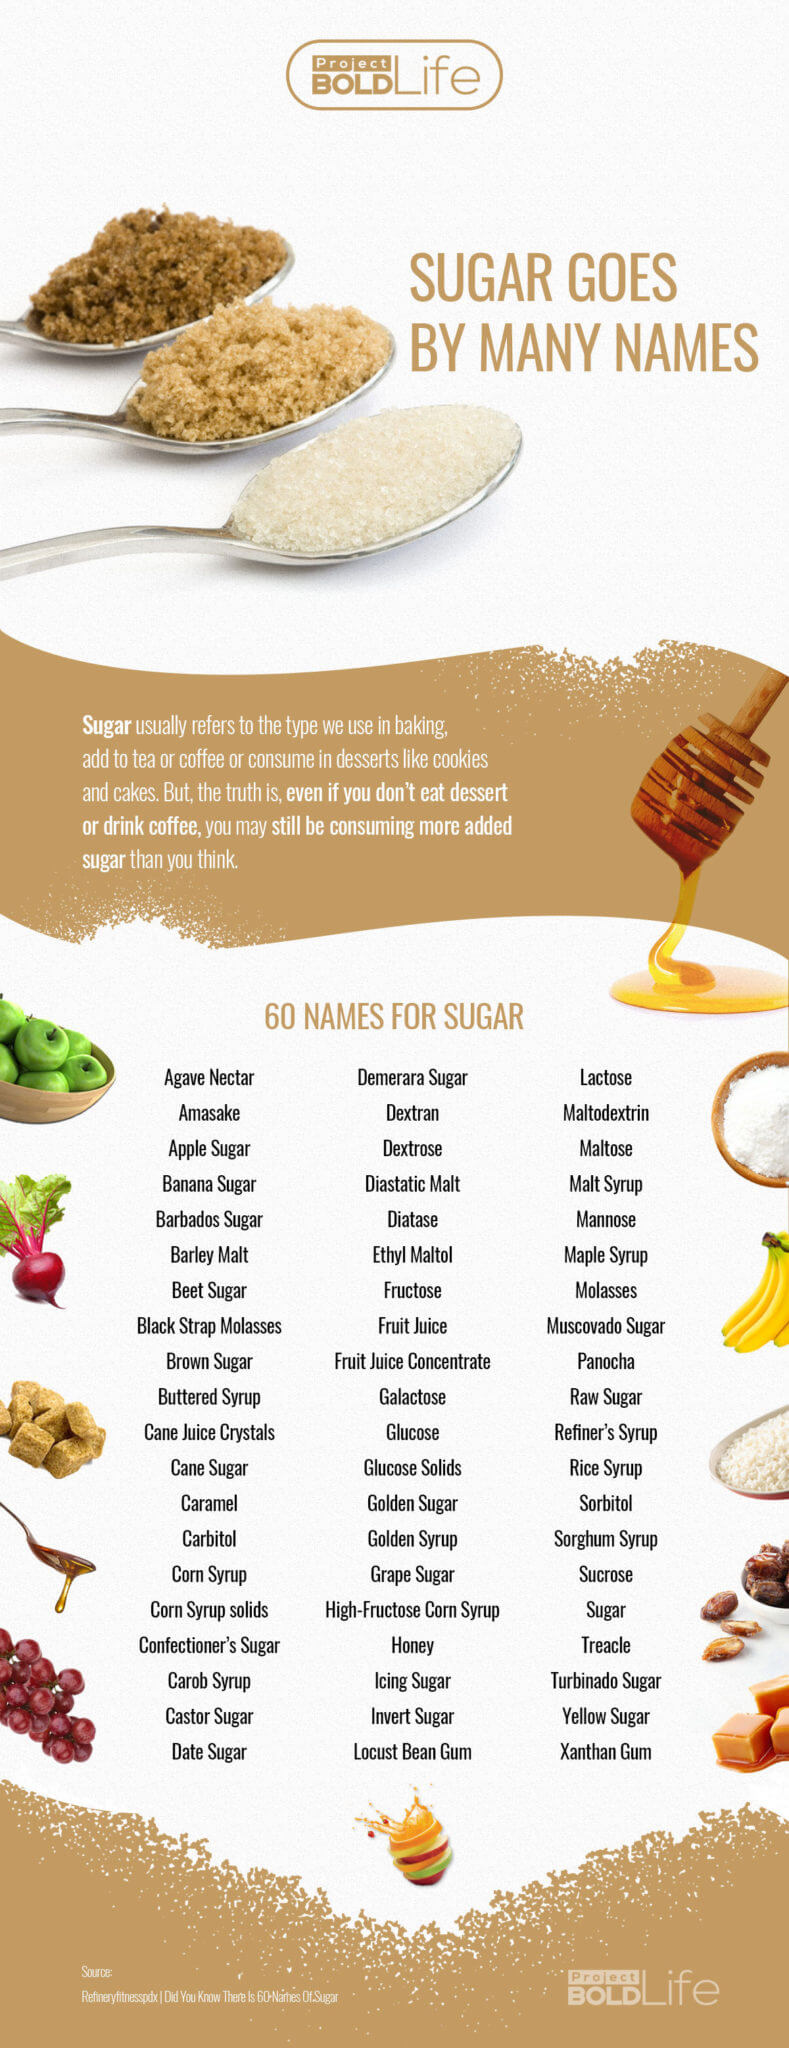 sugar goes by many names infographic